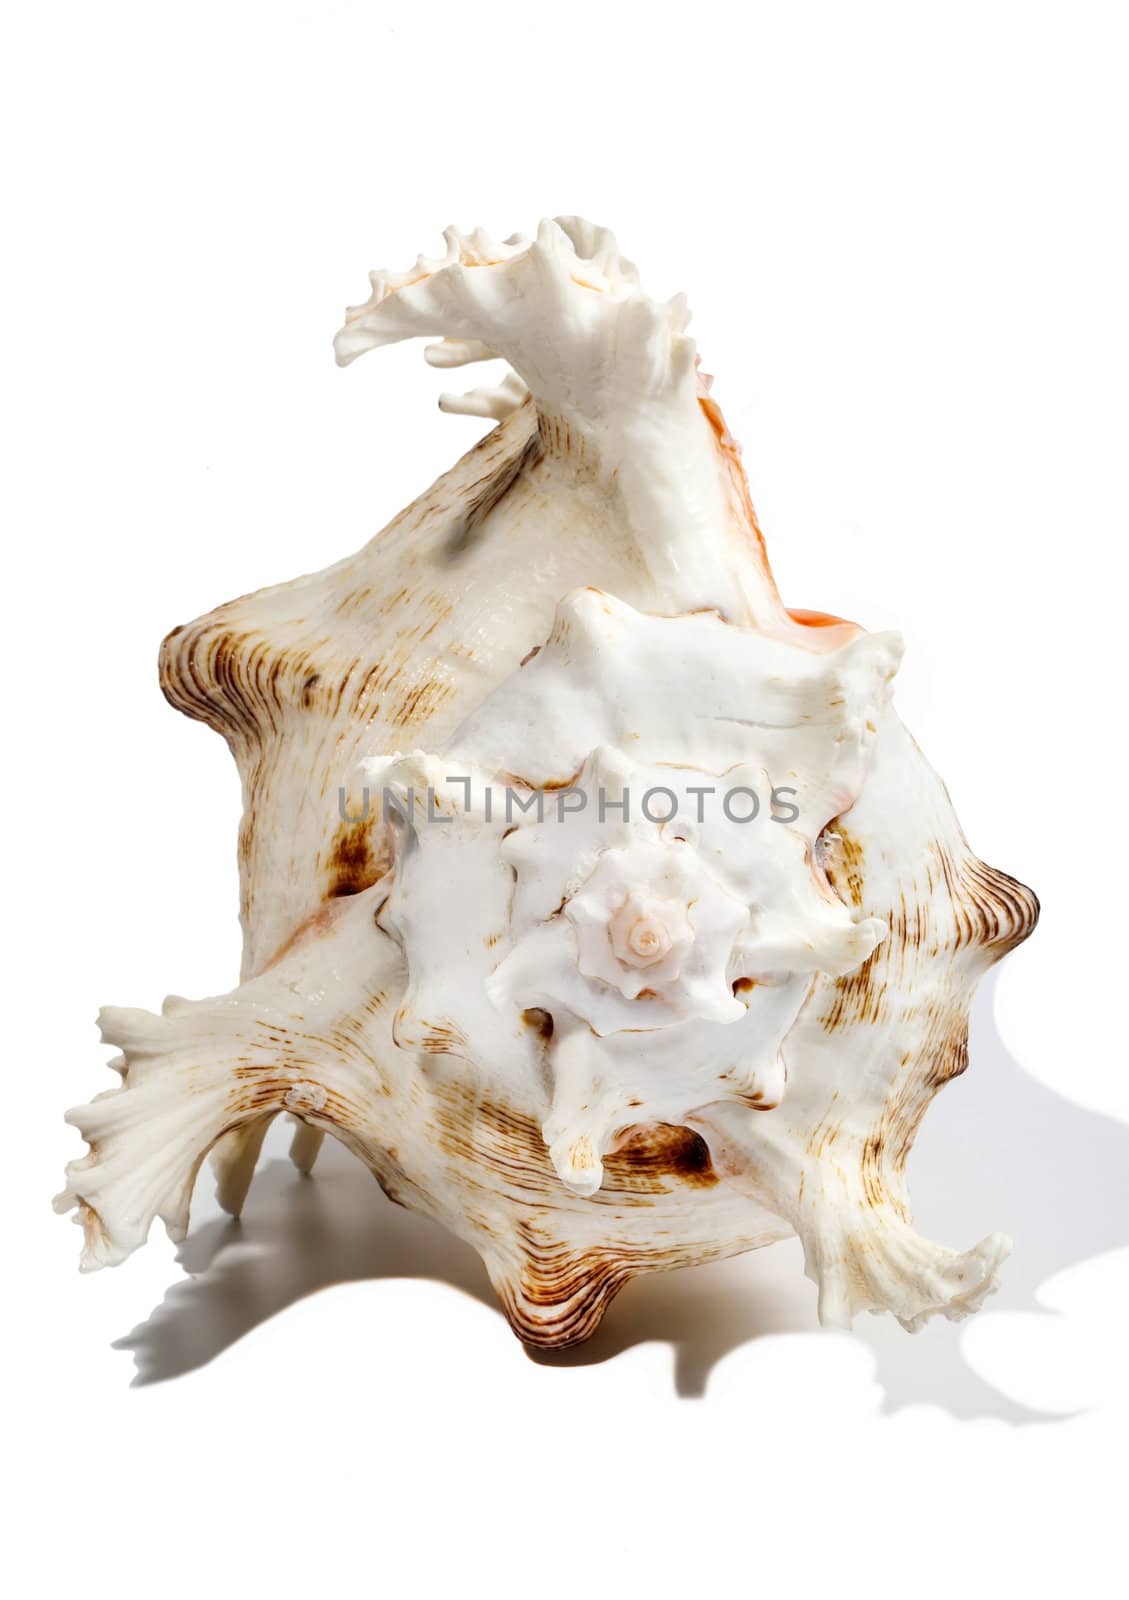 Sea shell spiral mollusk isolated on white by RawGroup